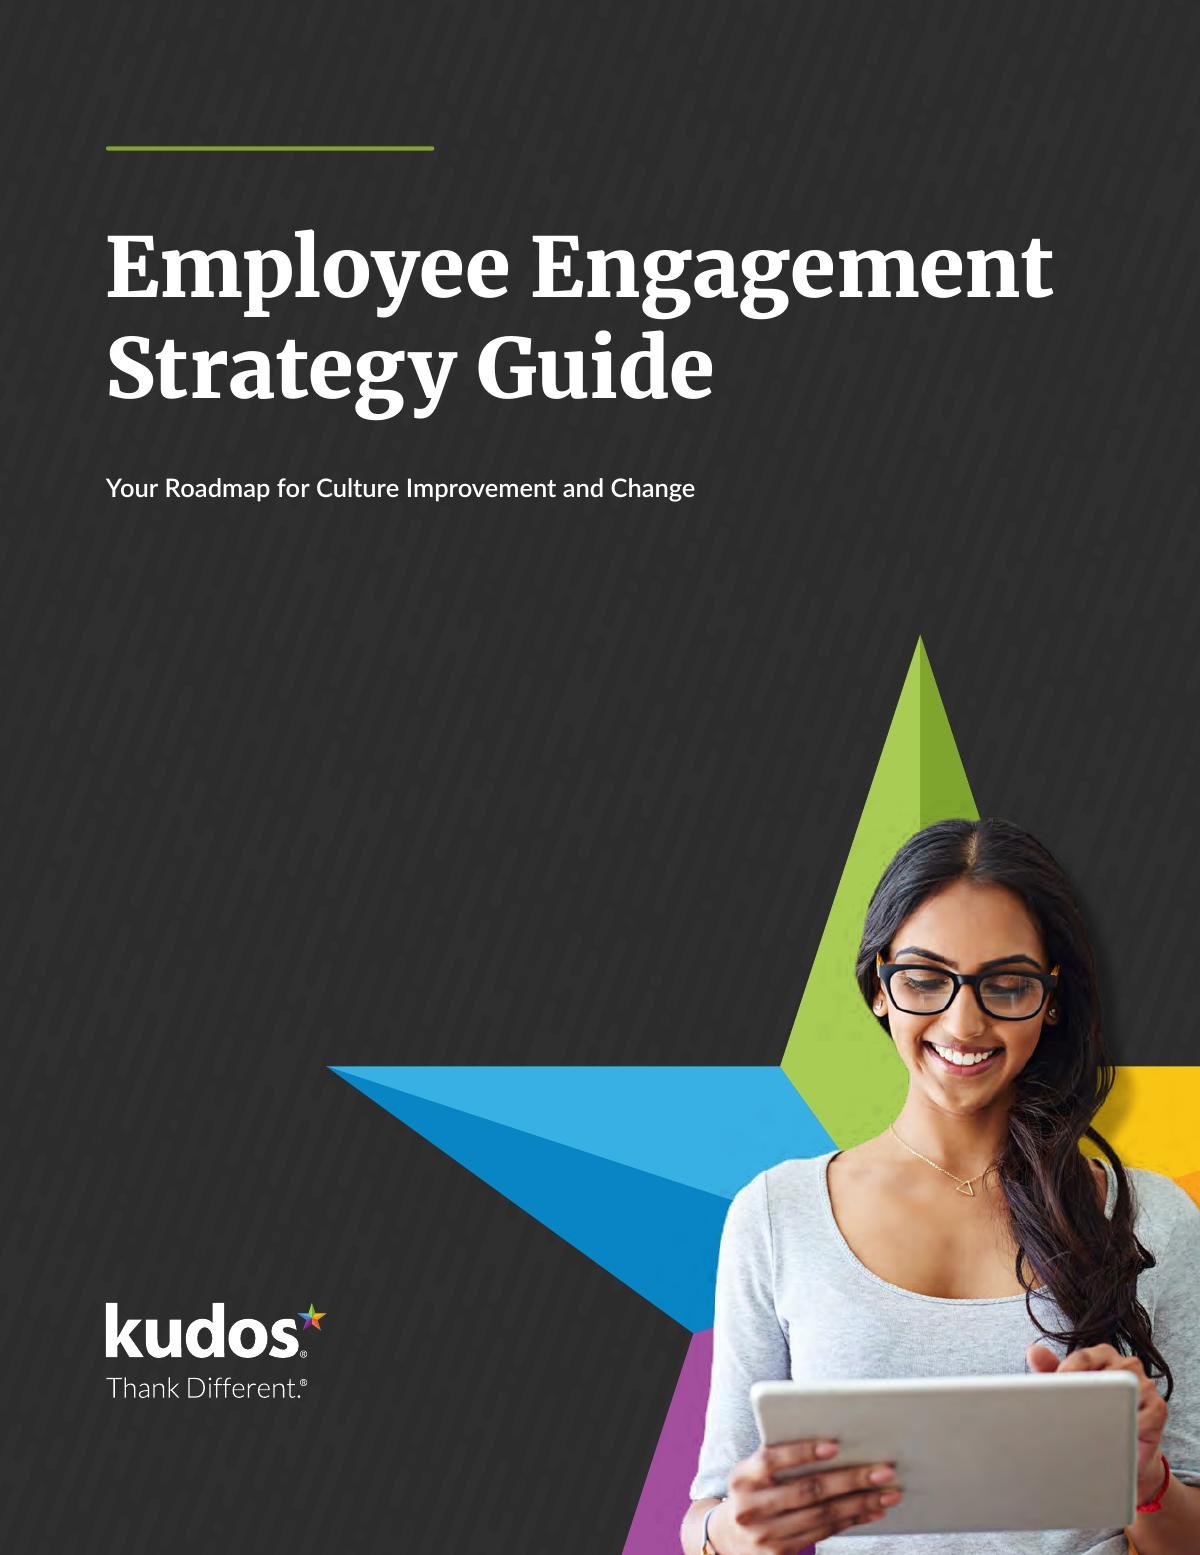 Employee Engagement Strategy Guide